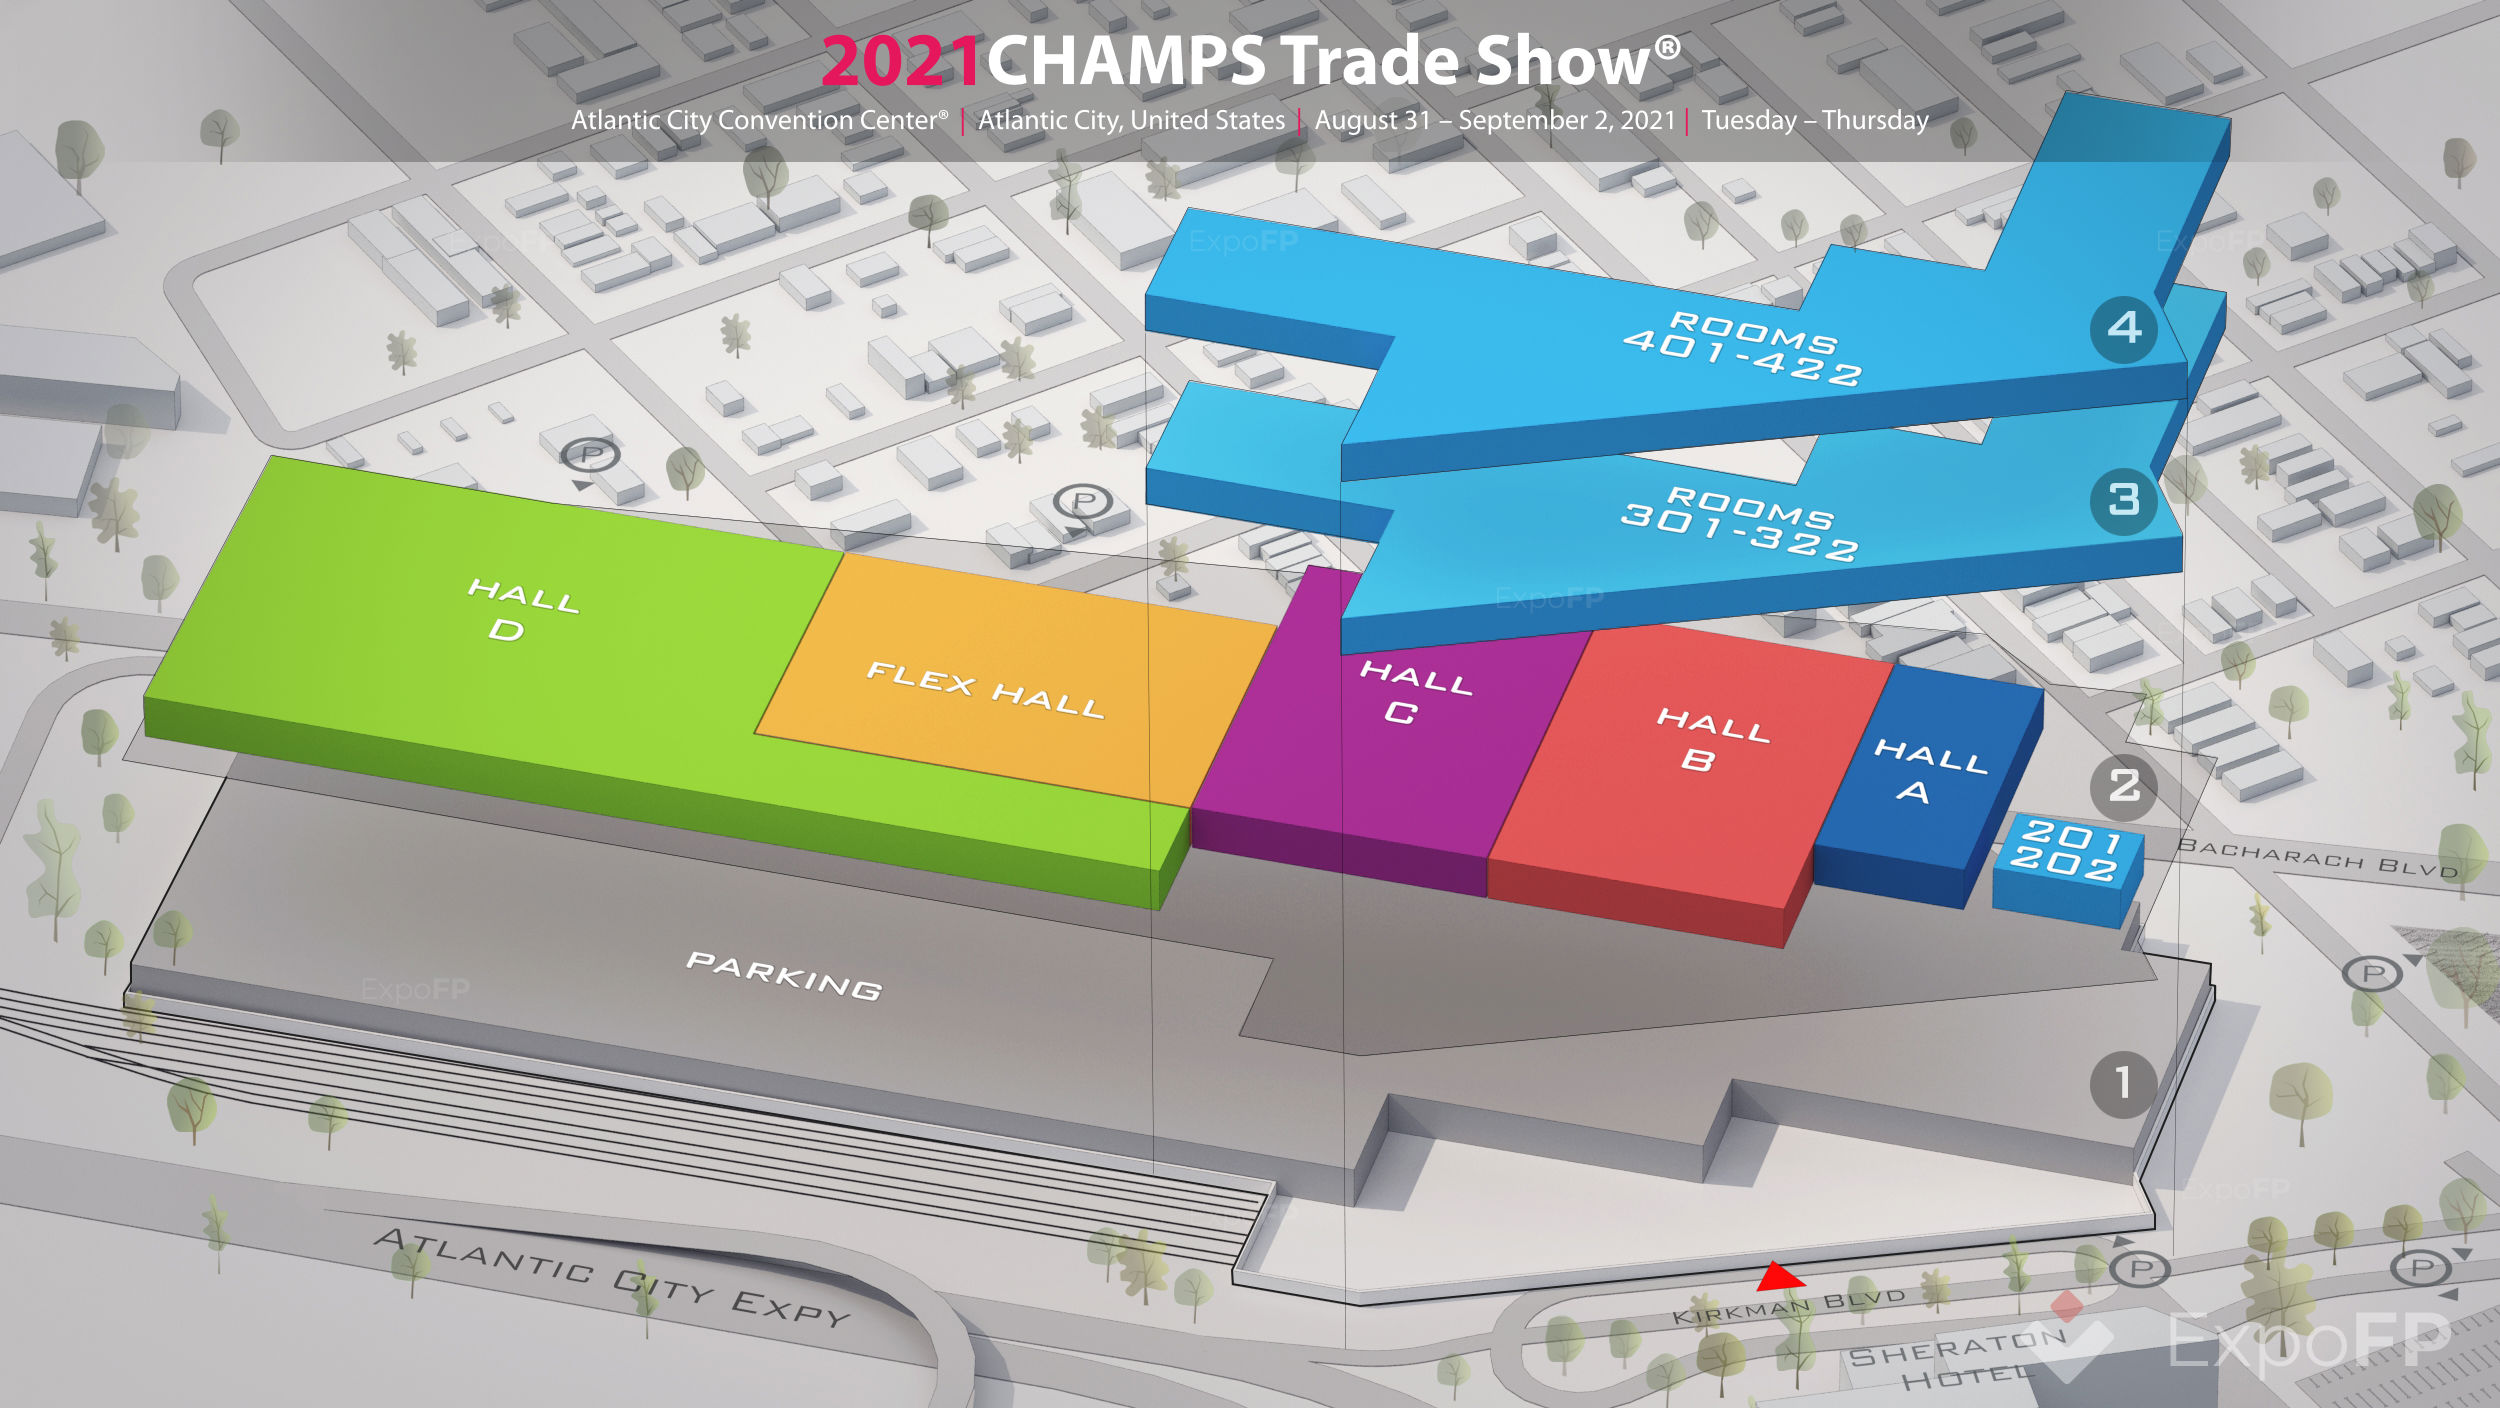 Champs Trade Show 2021 In Atlantic City Convention Center